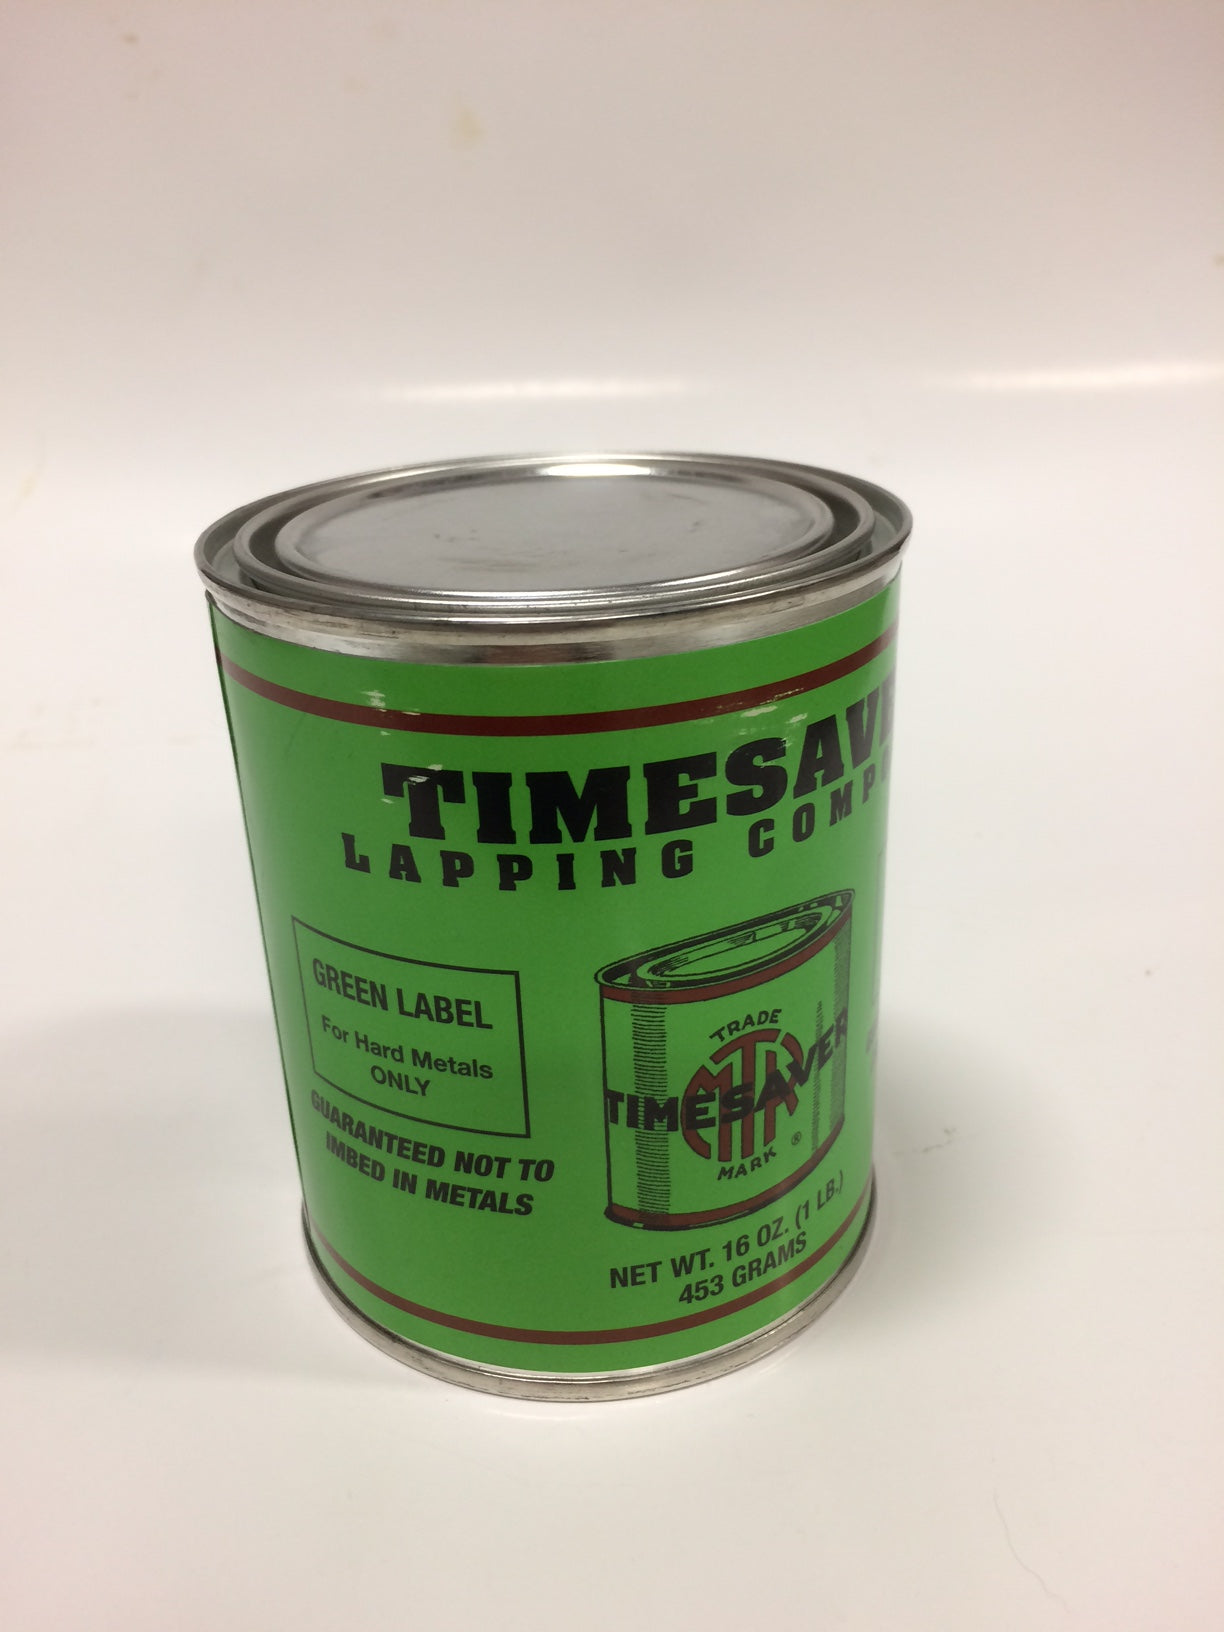 Timesaver 1 lb Green Label Lapping Compounds – NEWMAN TOOLS SHOPPING CART